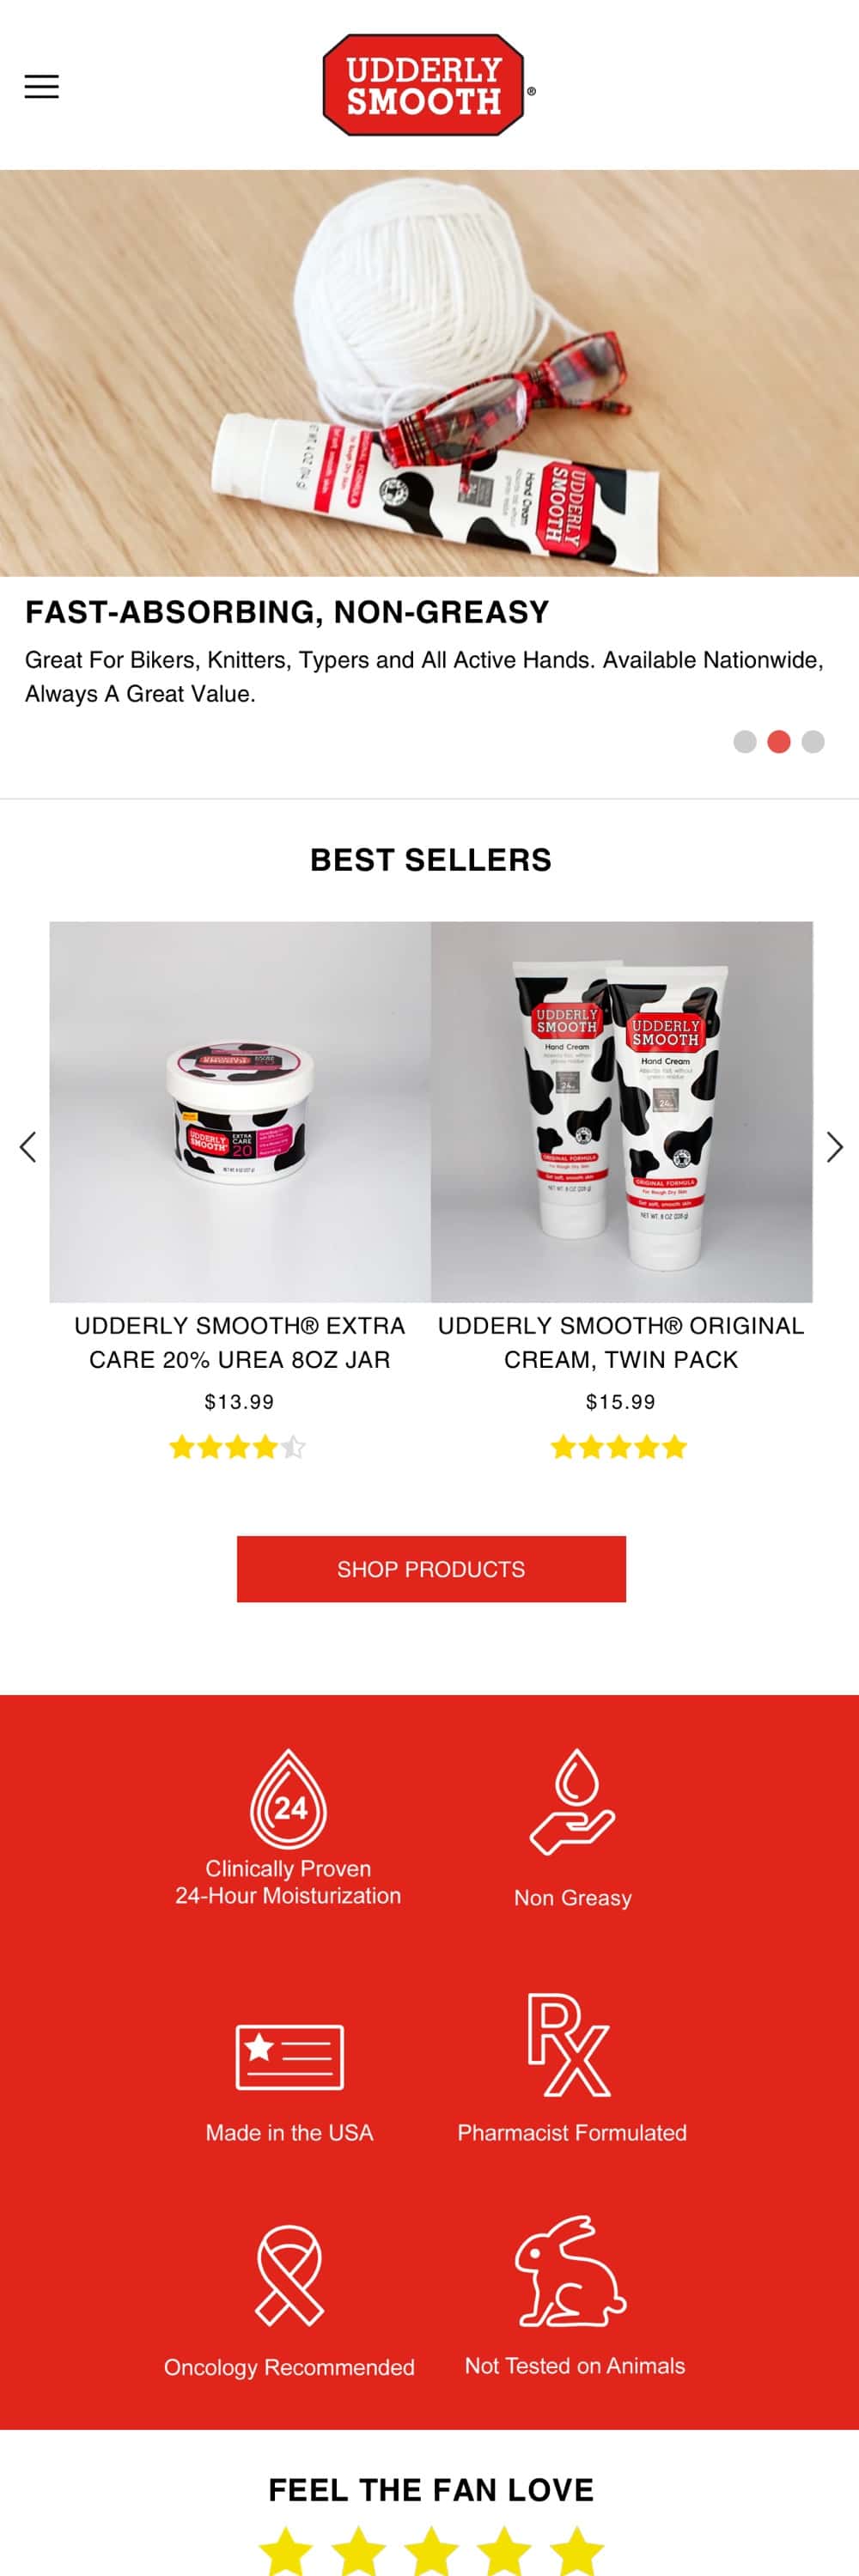 screen shot of the Udderly Smooth website home page